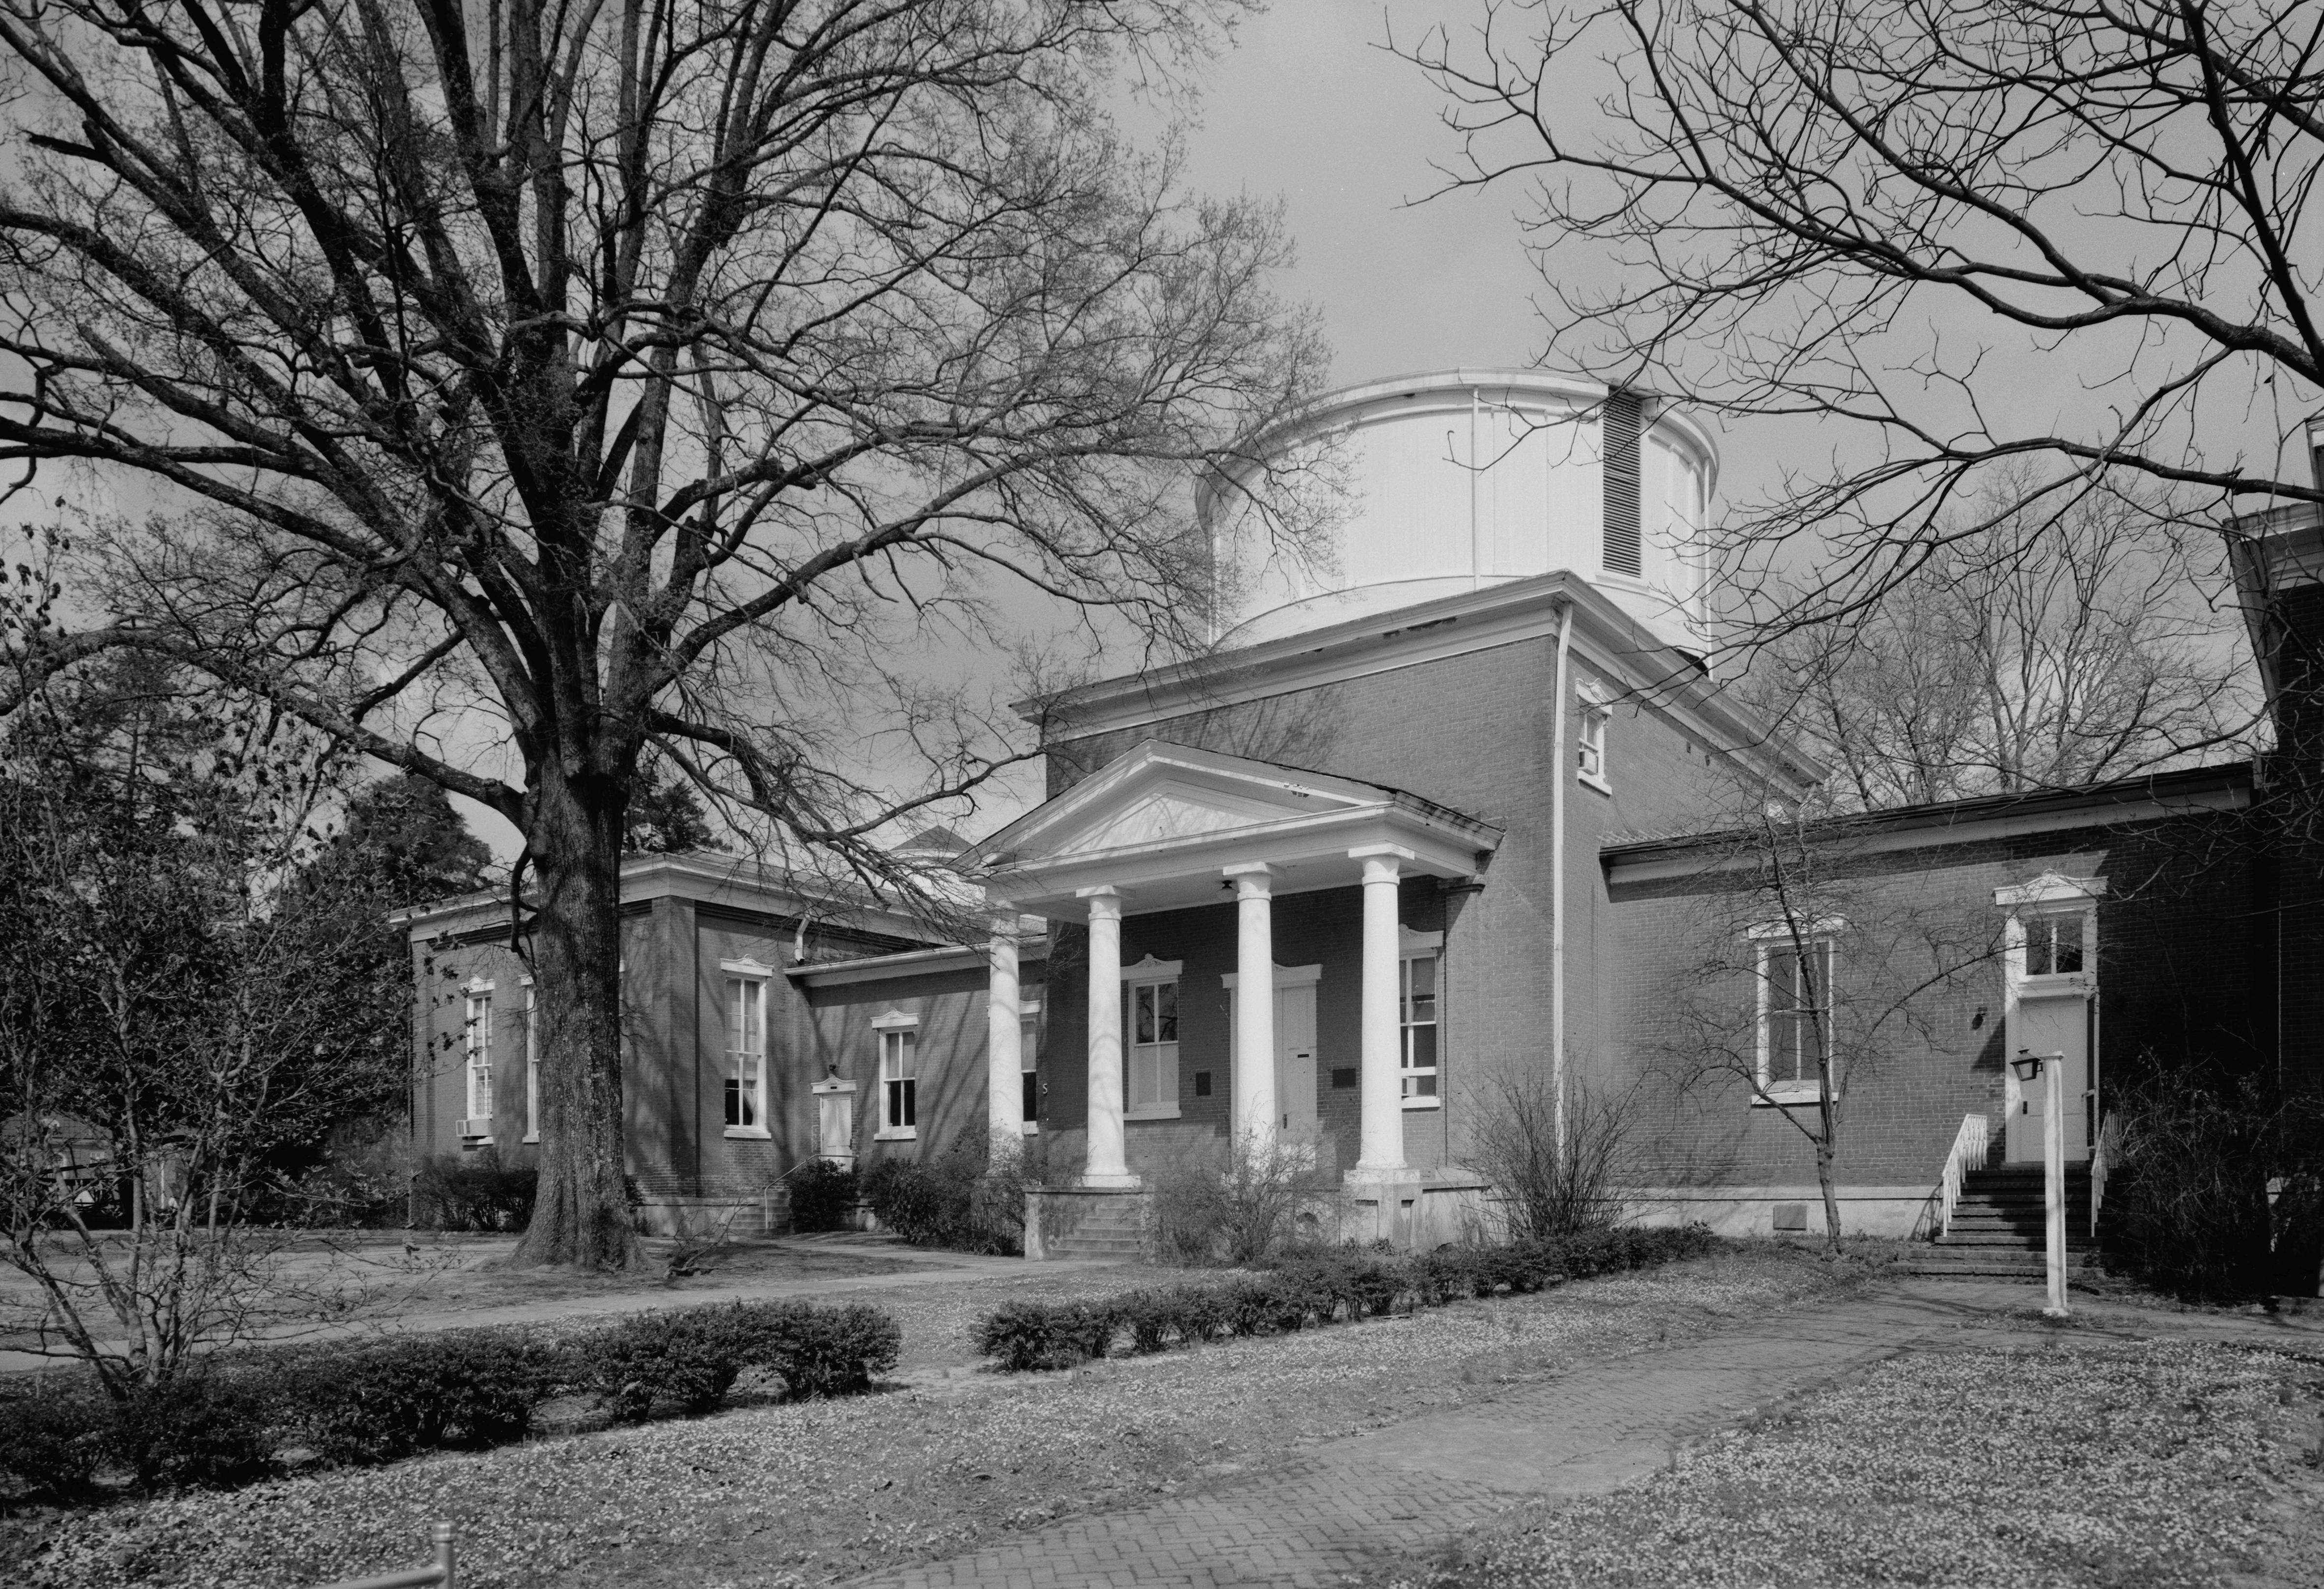 Barnard Observatory was built in 1859 and has served a number of purposes over the years. Today it houses the Center for the Study of Southern Culture.